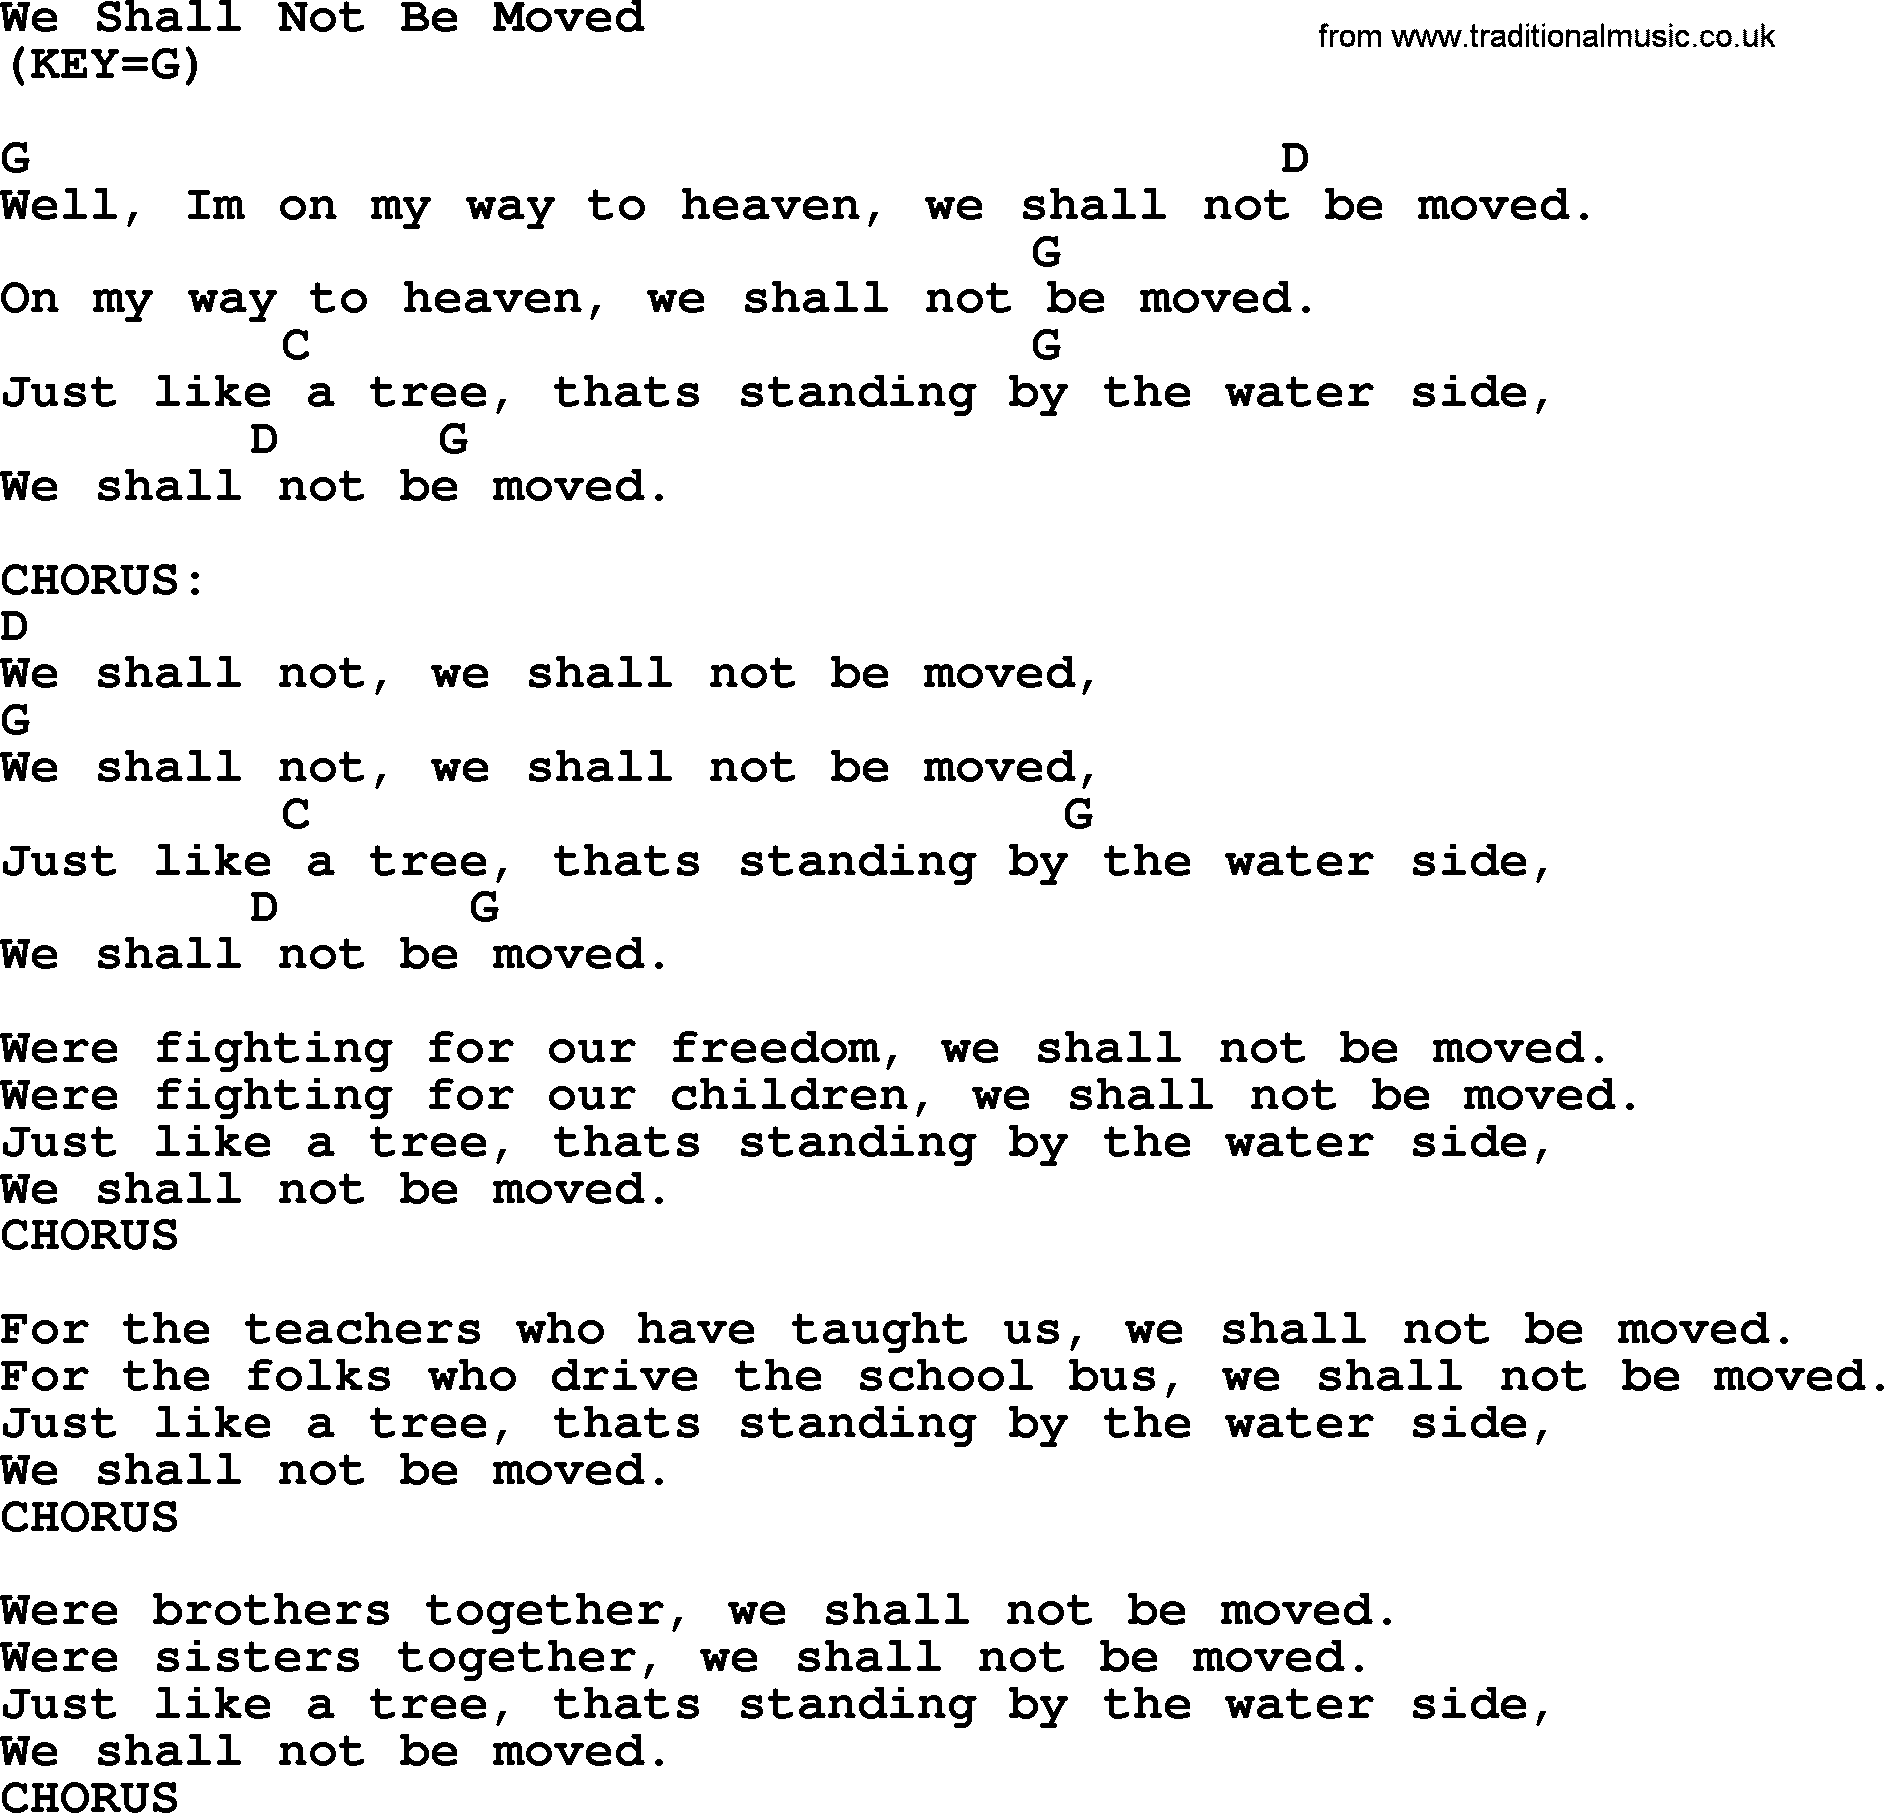 Political, Solidarity, Workers or Union song: We Shall Not Be Moved, lyrics and chords